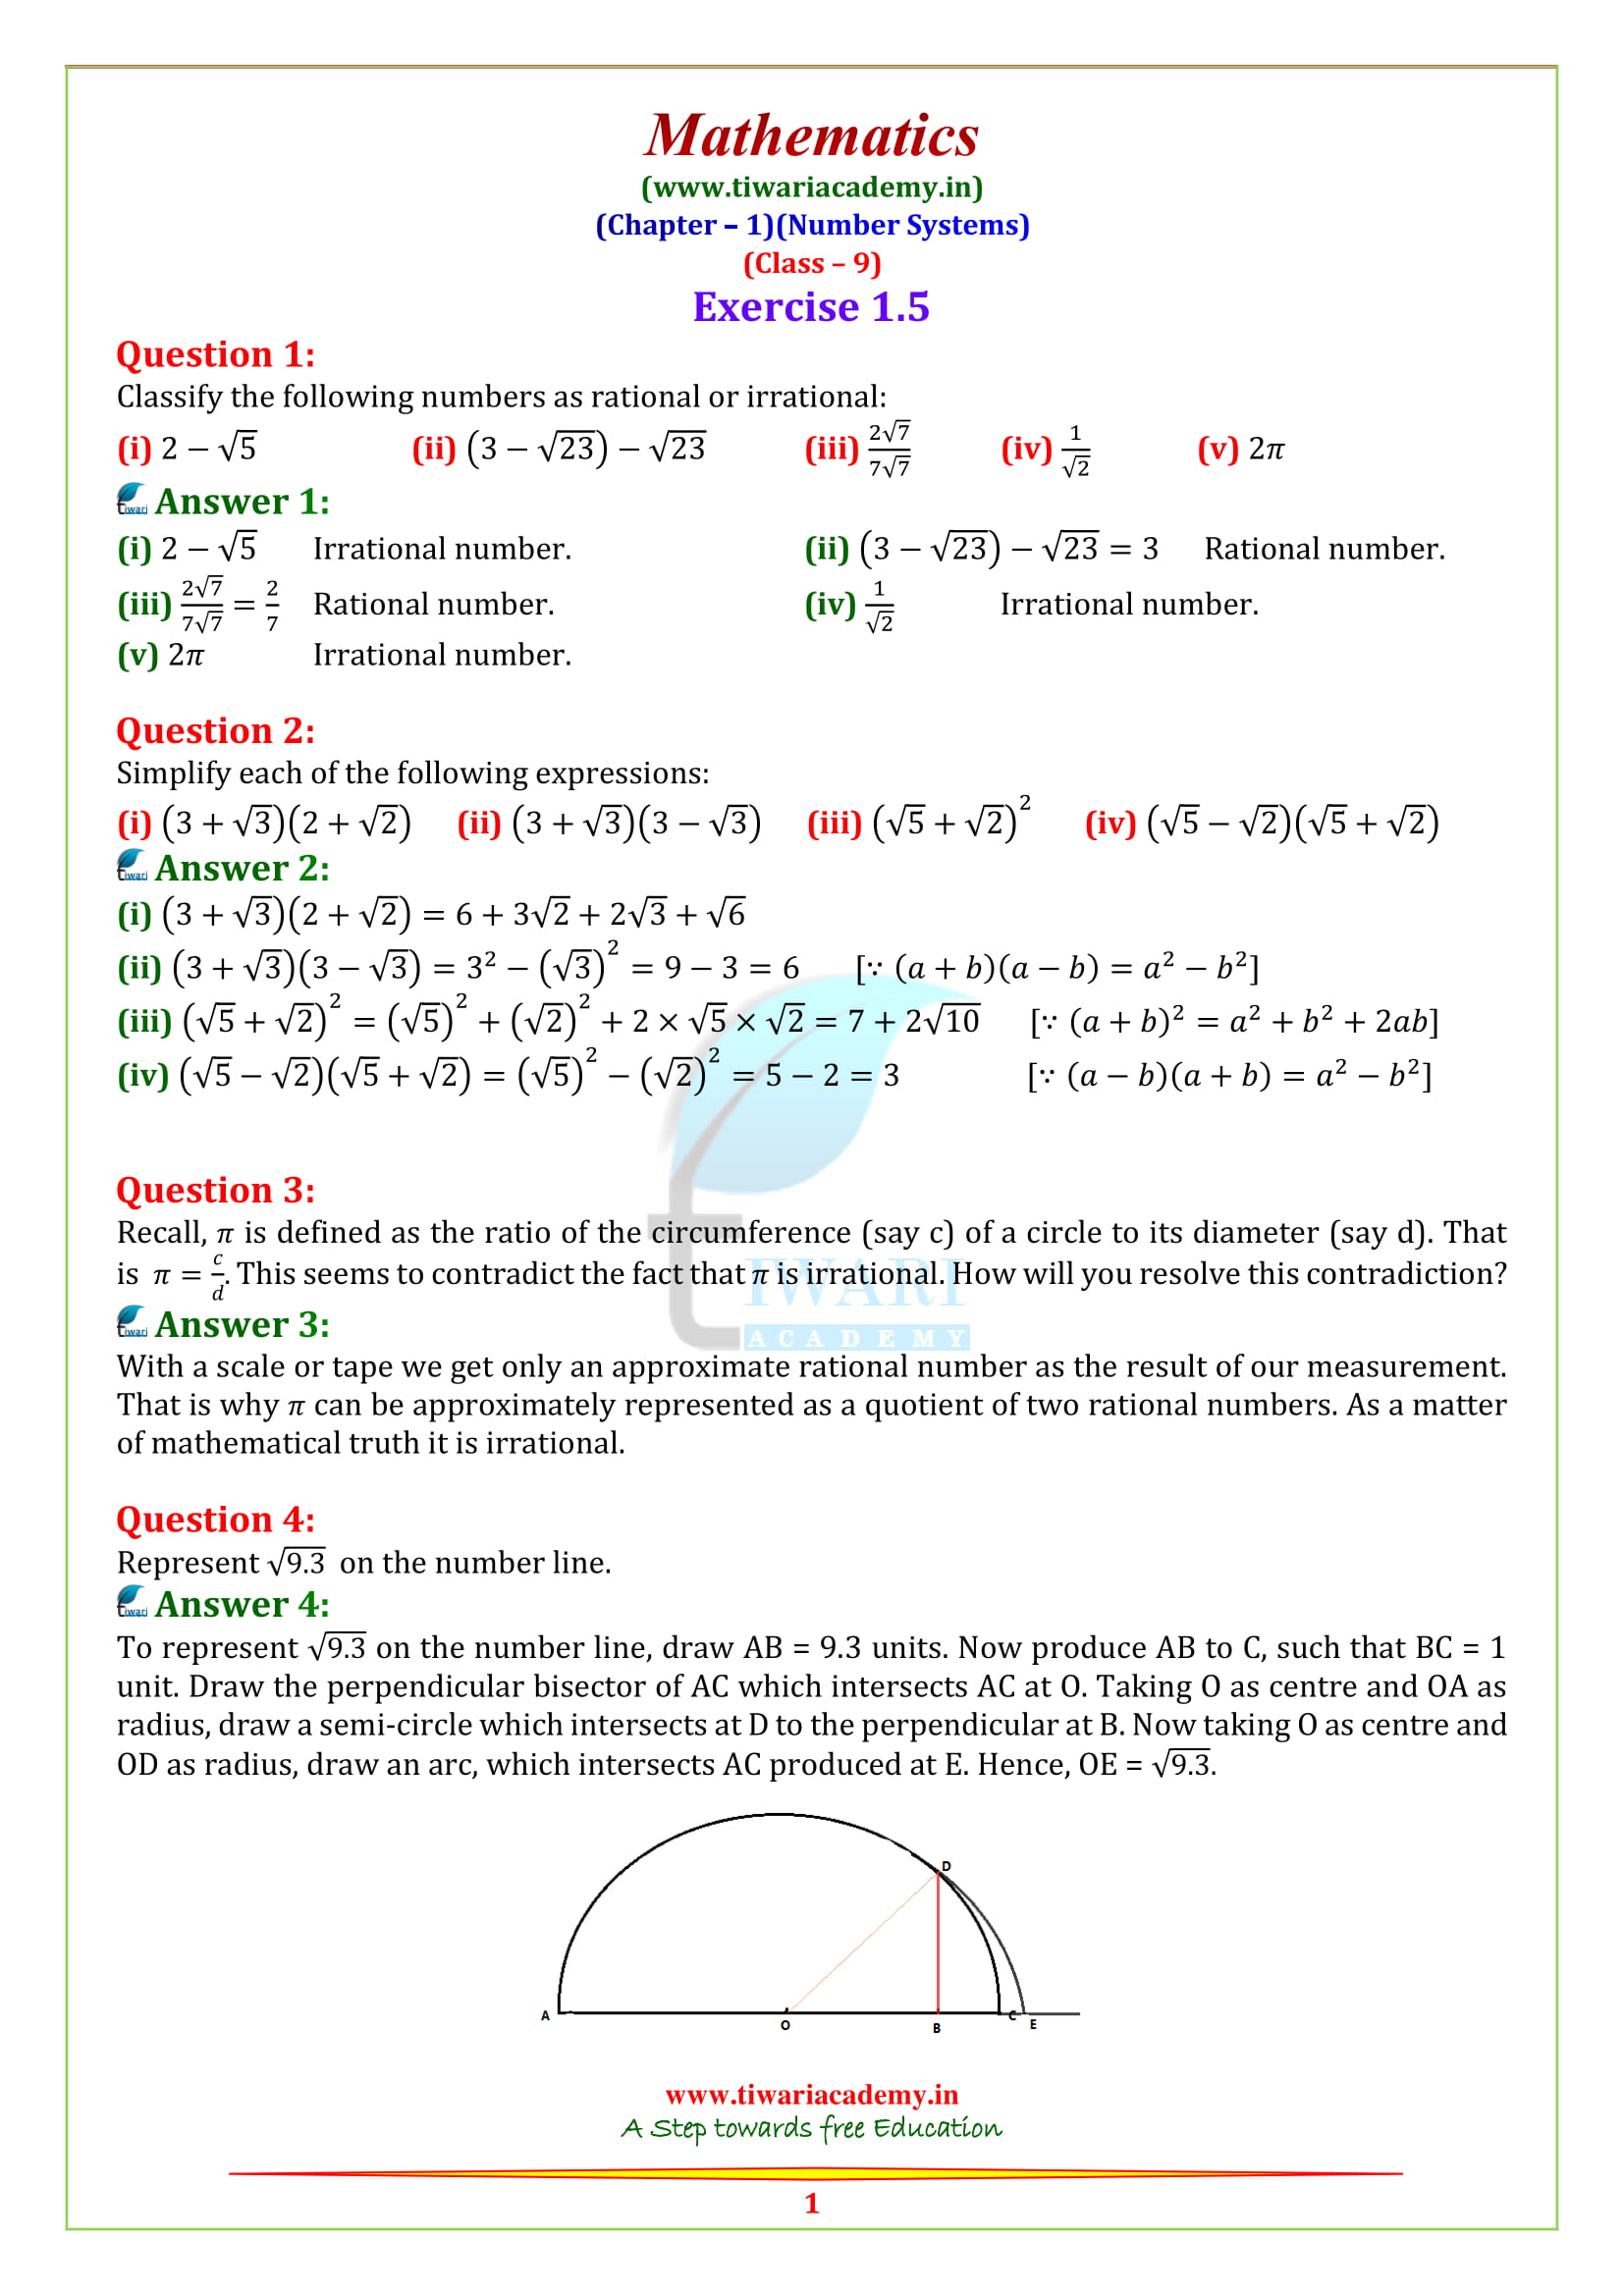 NCERT Solutions for Class 9 Maths Chapter 1 Exercise 1.5